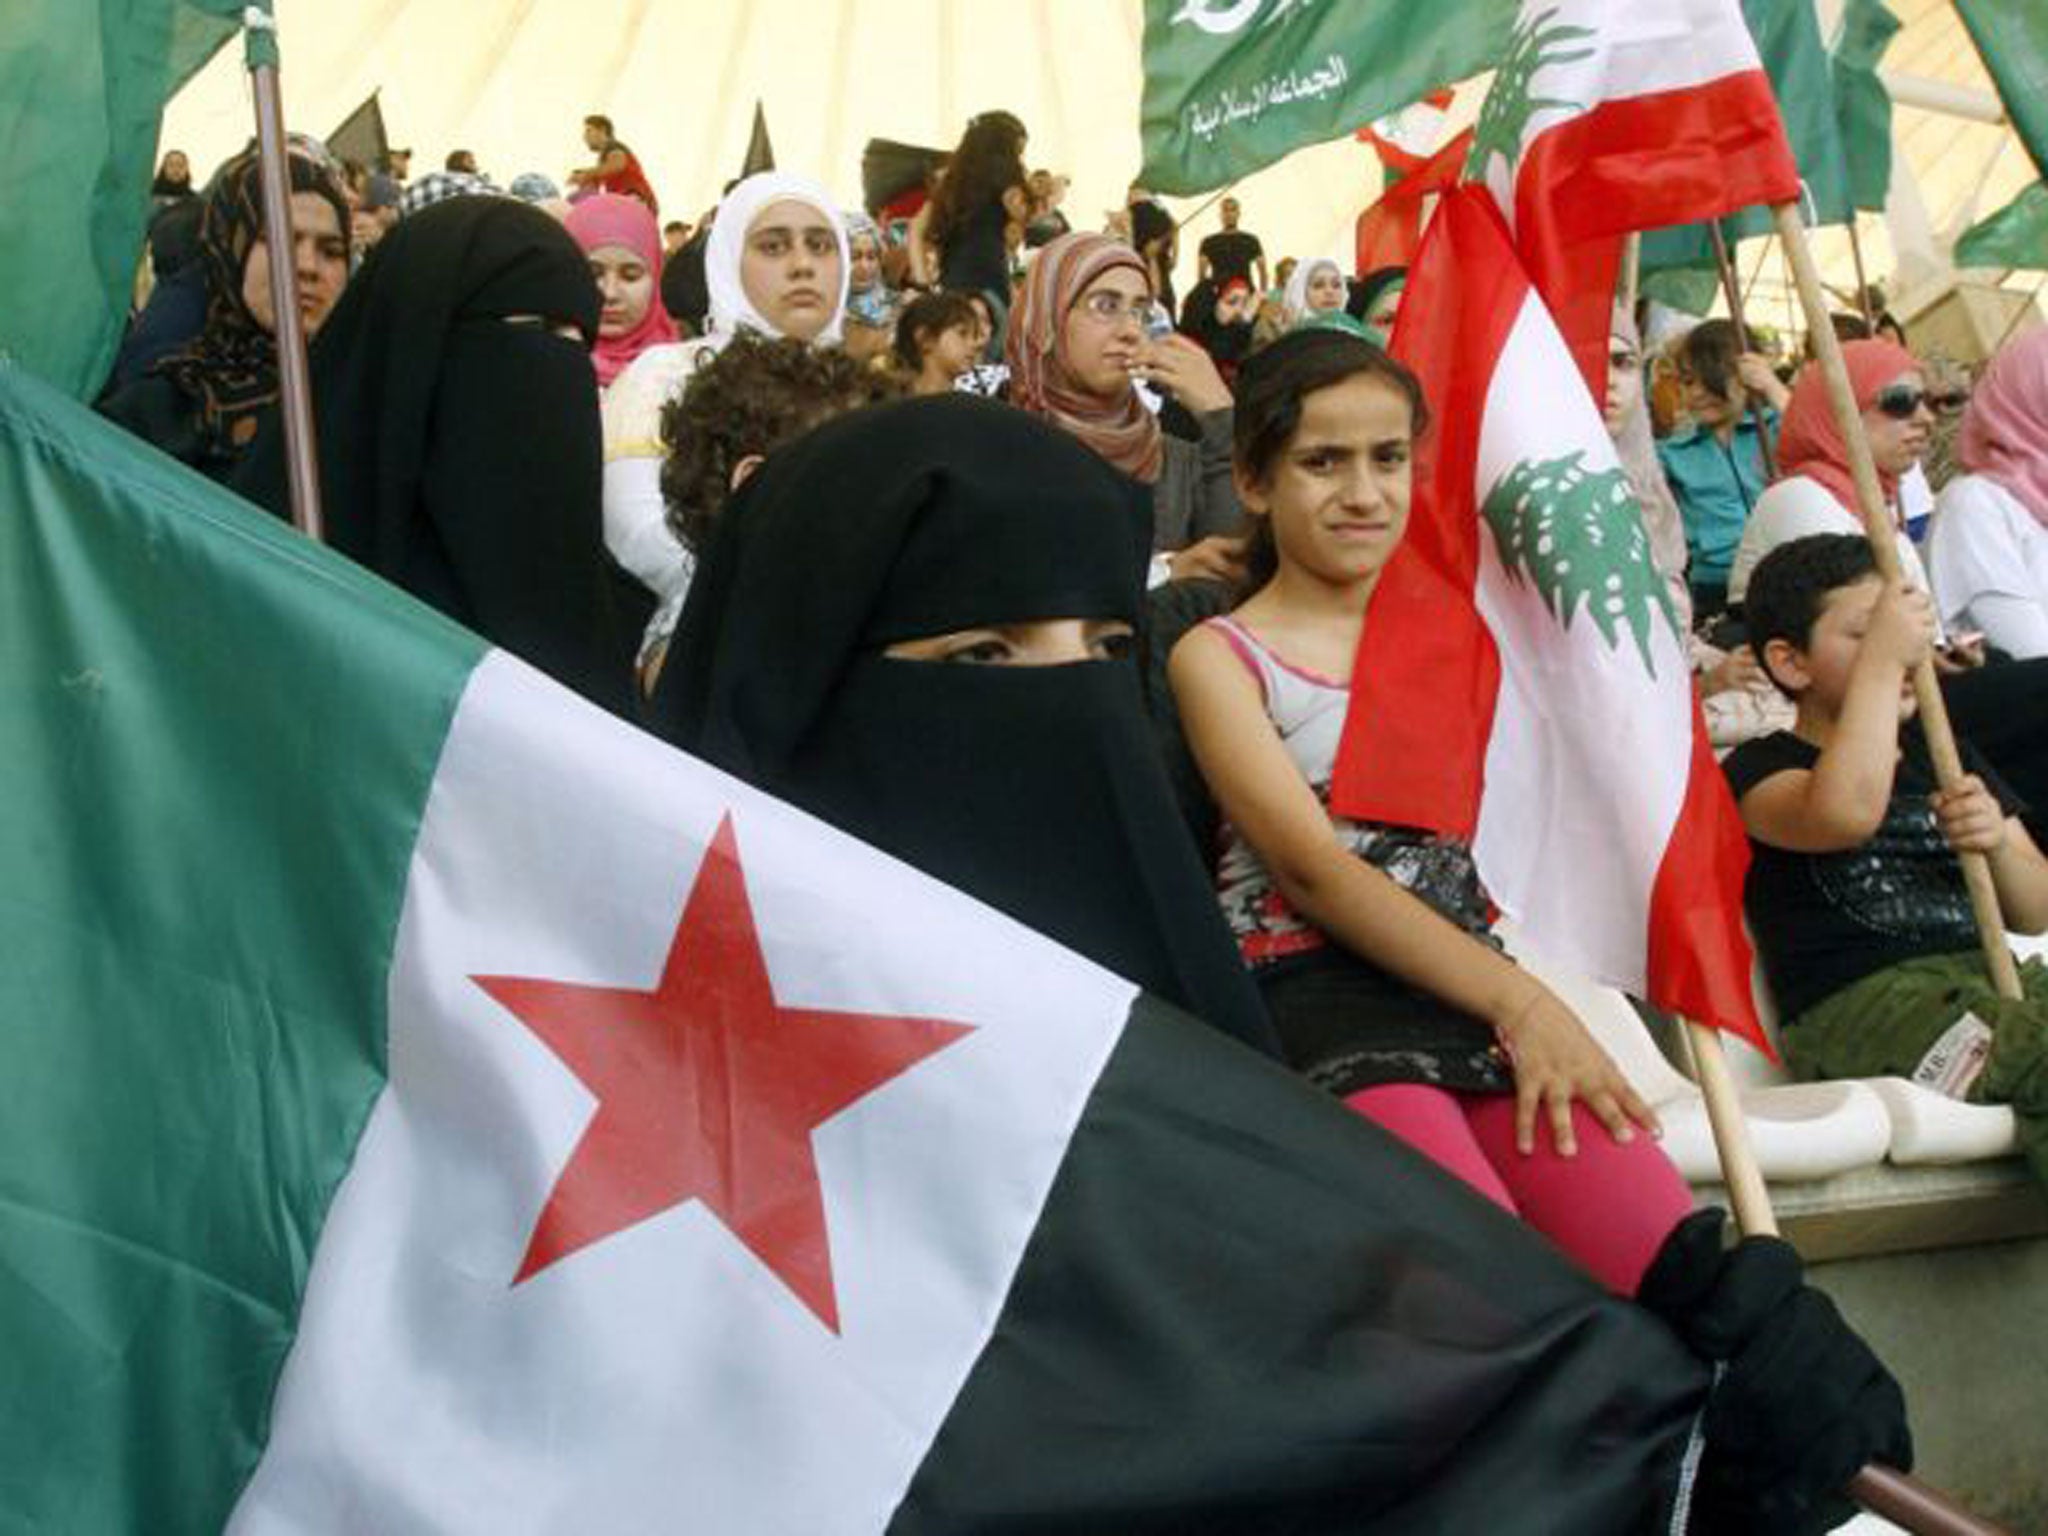 Syrians and Lebanese protesters in Sidon on the same day